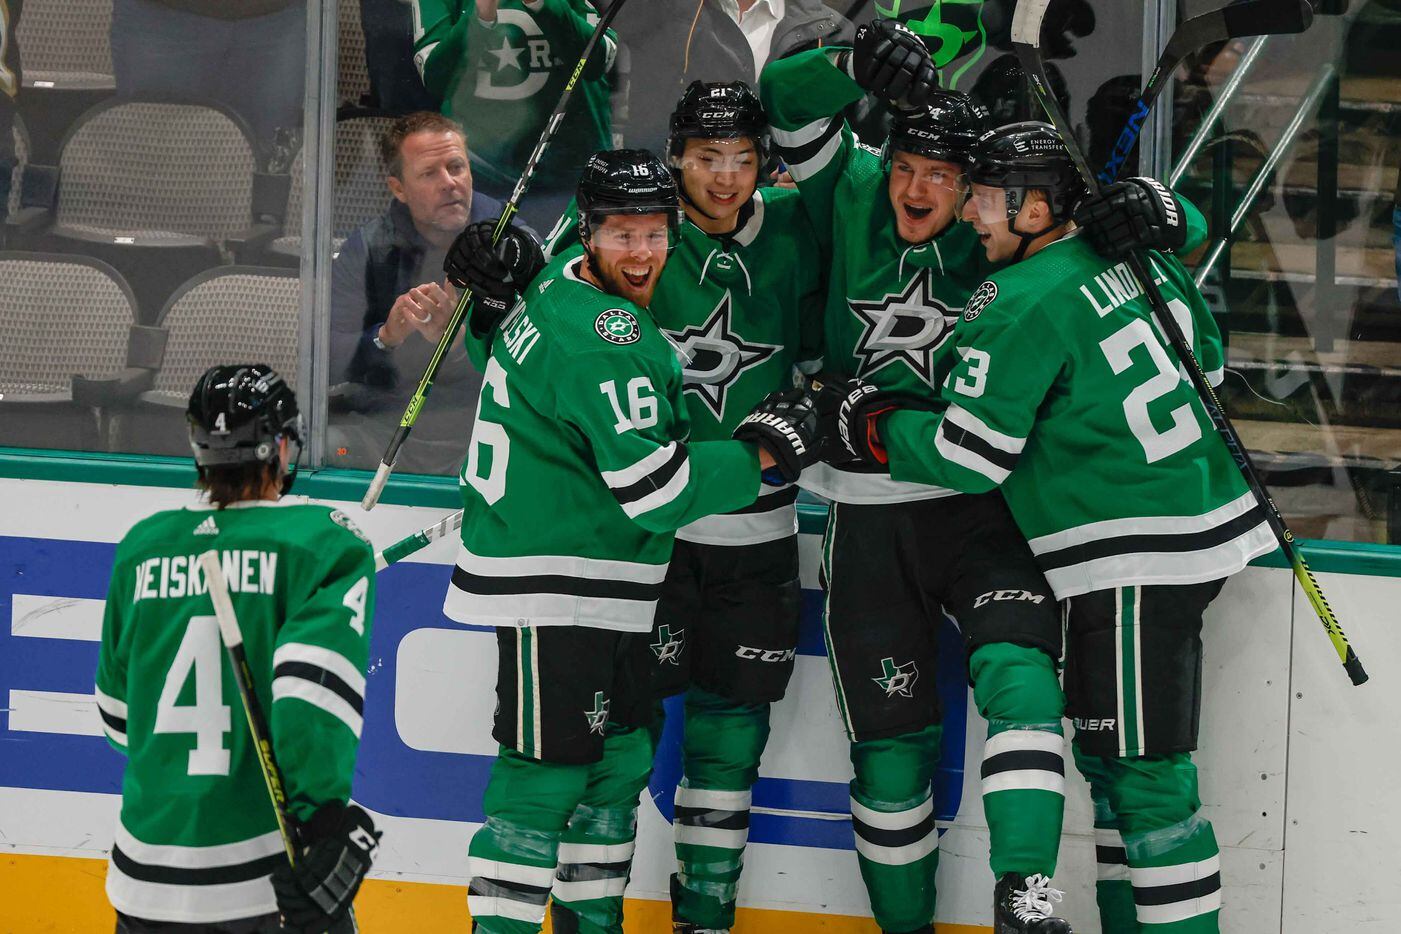 Dallas Stars left wing Roope Hintz (24) celebrates his goal against the Arizona Coyotes with his teammates left wing Jason Robertson (21), center Joe Pavelski (16), defenseman Esa Lindell (23) and defenseman Miro Heiskanen (4) during first period at the American Airlines Center in Dallas on Monday, December 6, 2021.